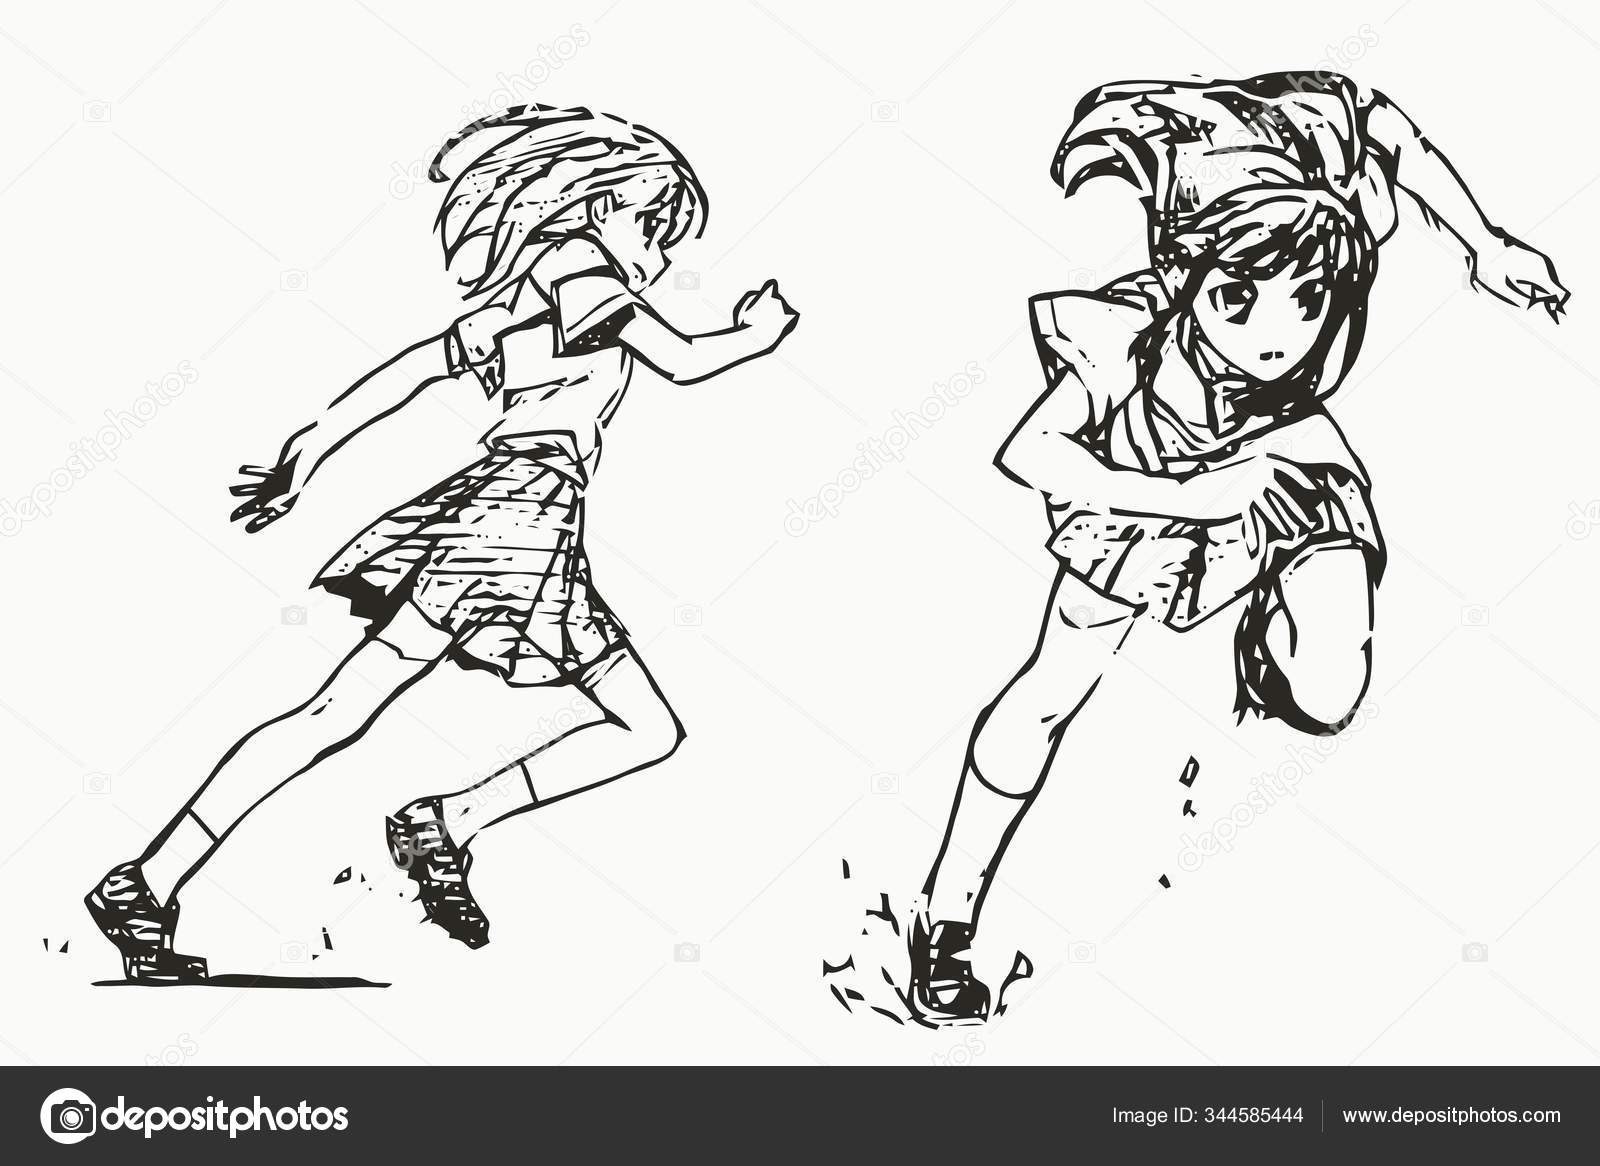 Anime Poses Drawing Reference Anime Body Sketch Cute Girl Manga Stock Photo Image By C Satoshy 344585444 Anime base fighter girls by ooisiusoo on deviantart. https depositphotos com 344585444 stock photo anime poses drawing reference anime html